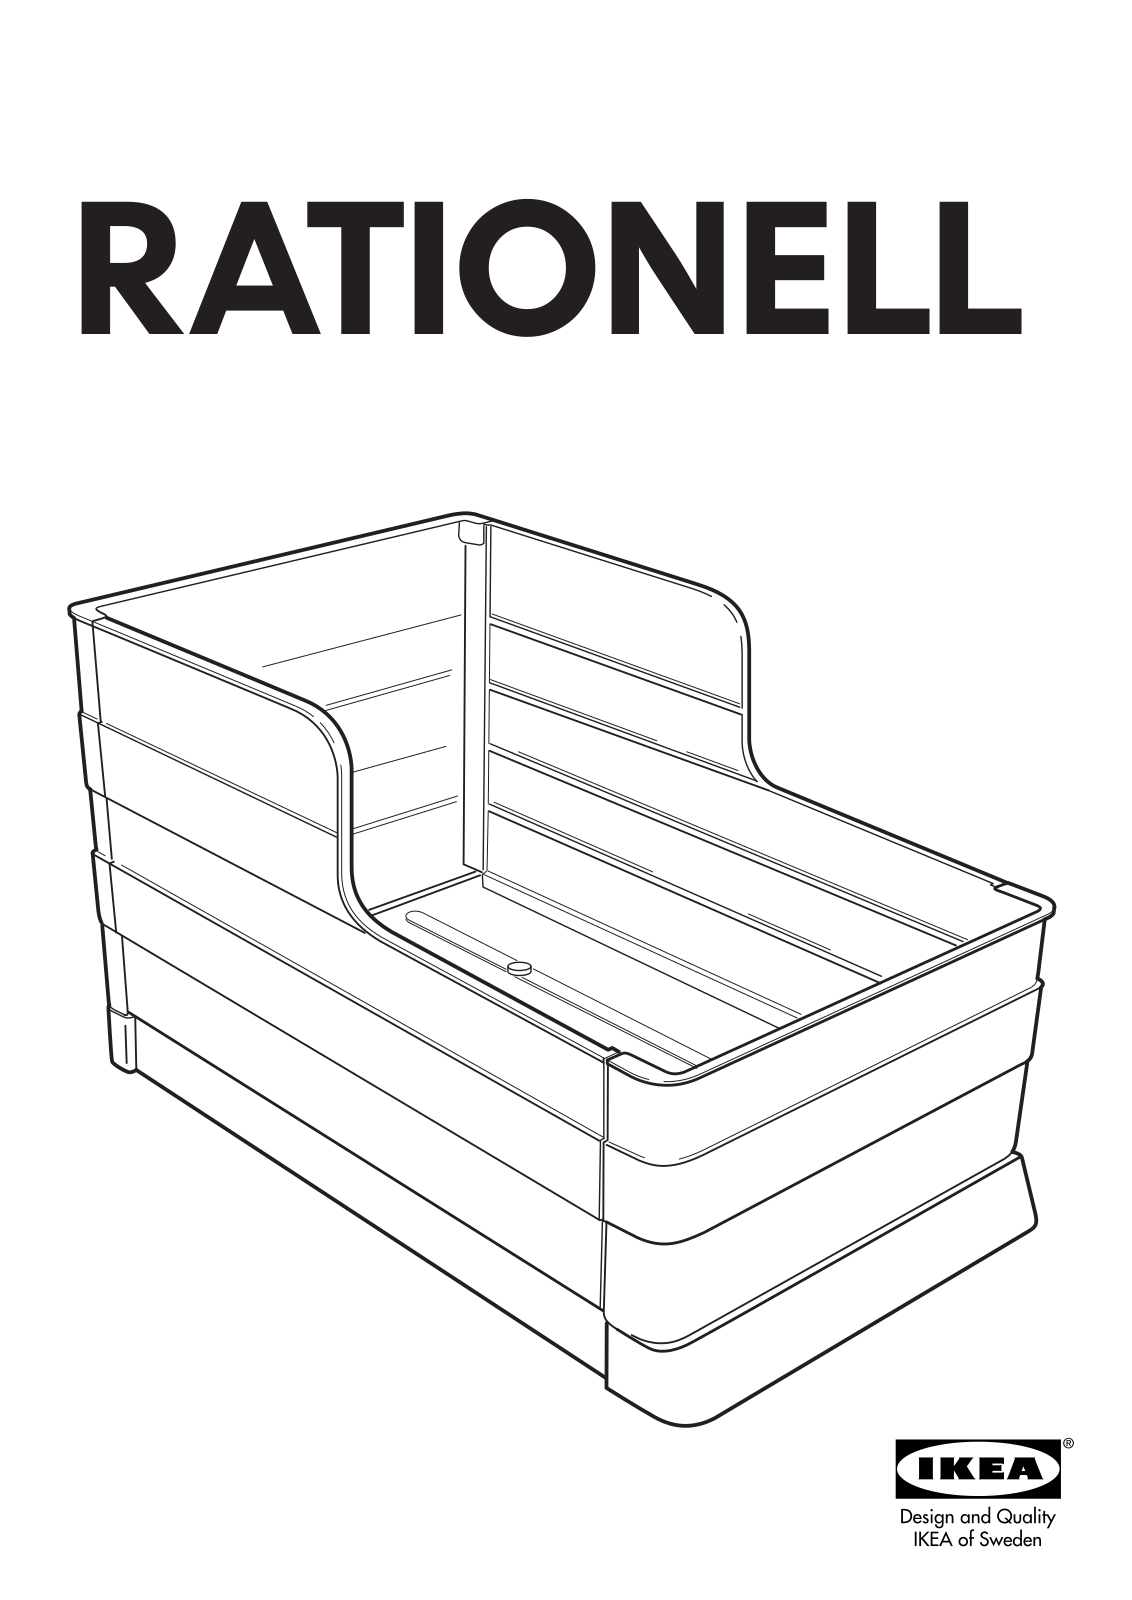 IKEA RATIONELL PULL-OUT TRAY FOR WASTEBIN Assembly Instruction